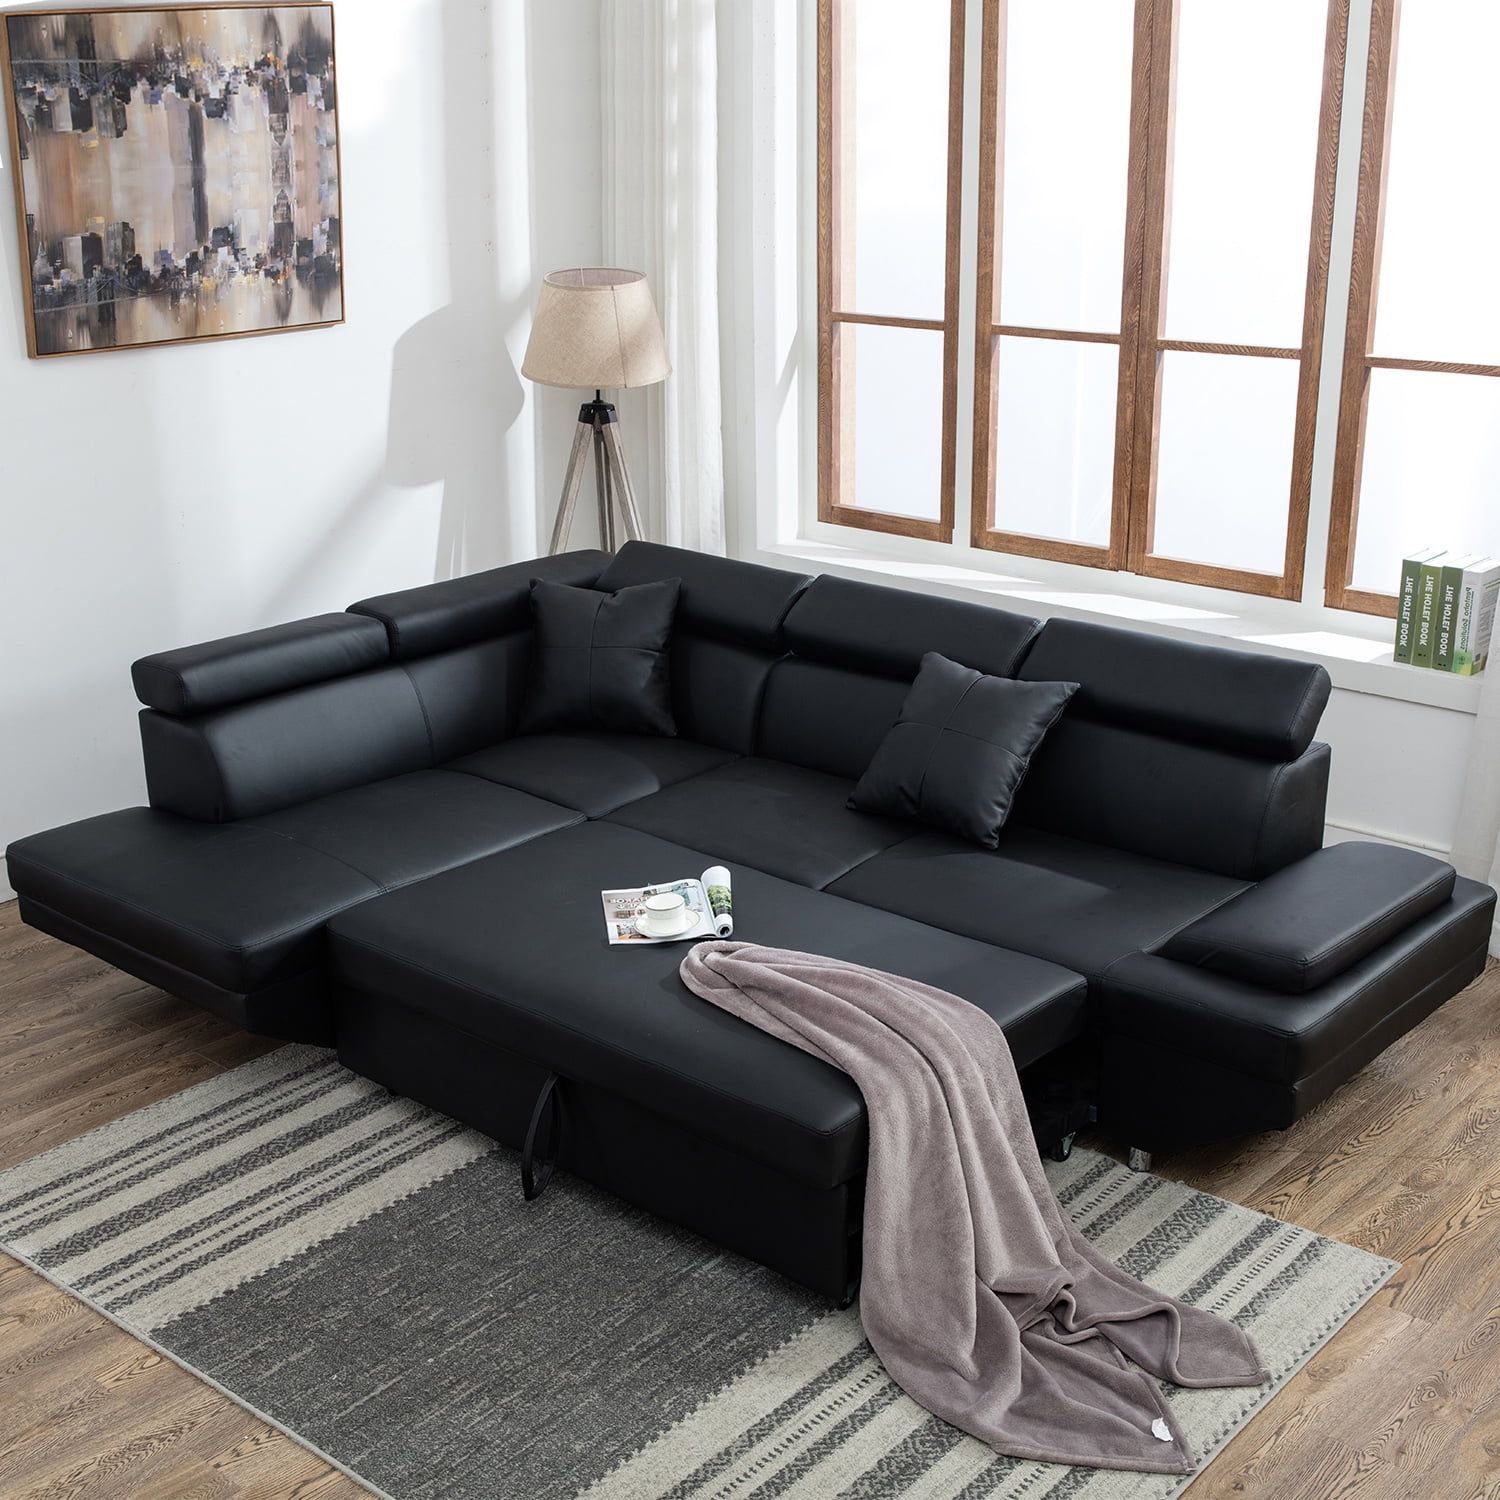 Best Choice Products 3 Seat L Shape Tufted Faux Leather Sectional Sofa Pertaining To 3 Seat L Shaped Sofas In Black (Gallery 1 of 20)